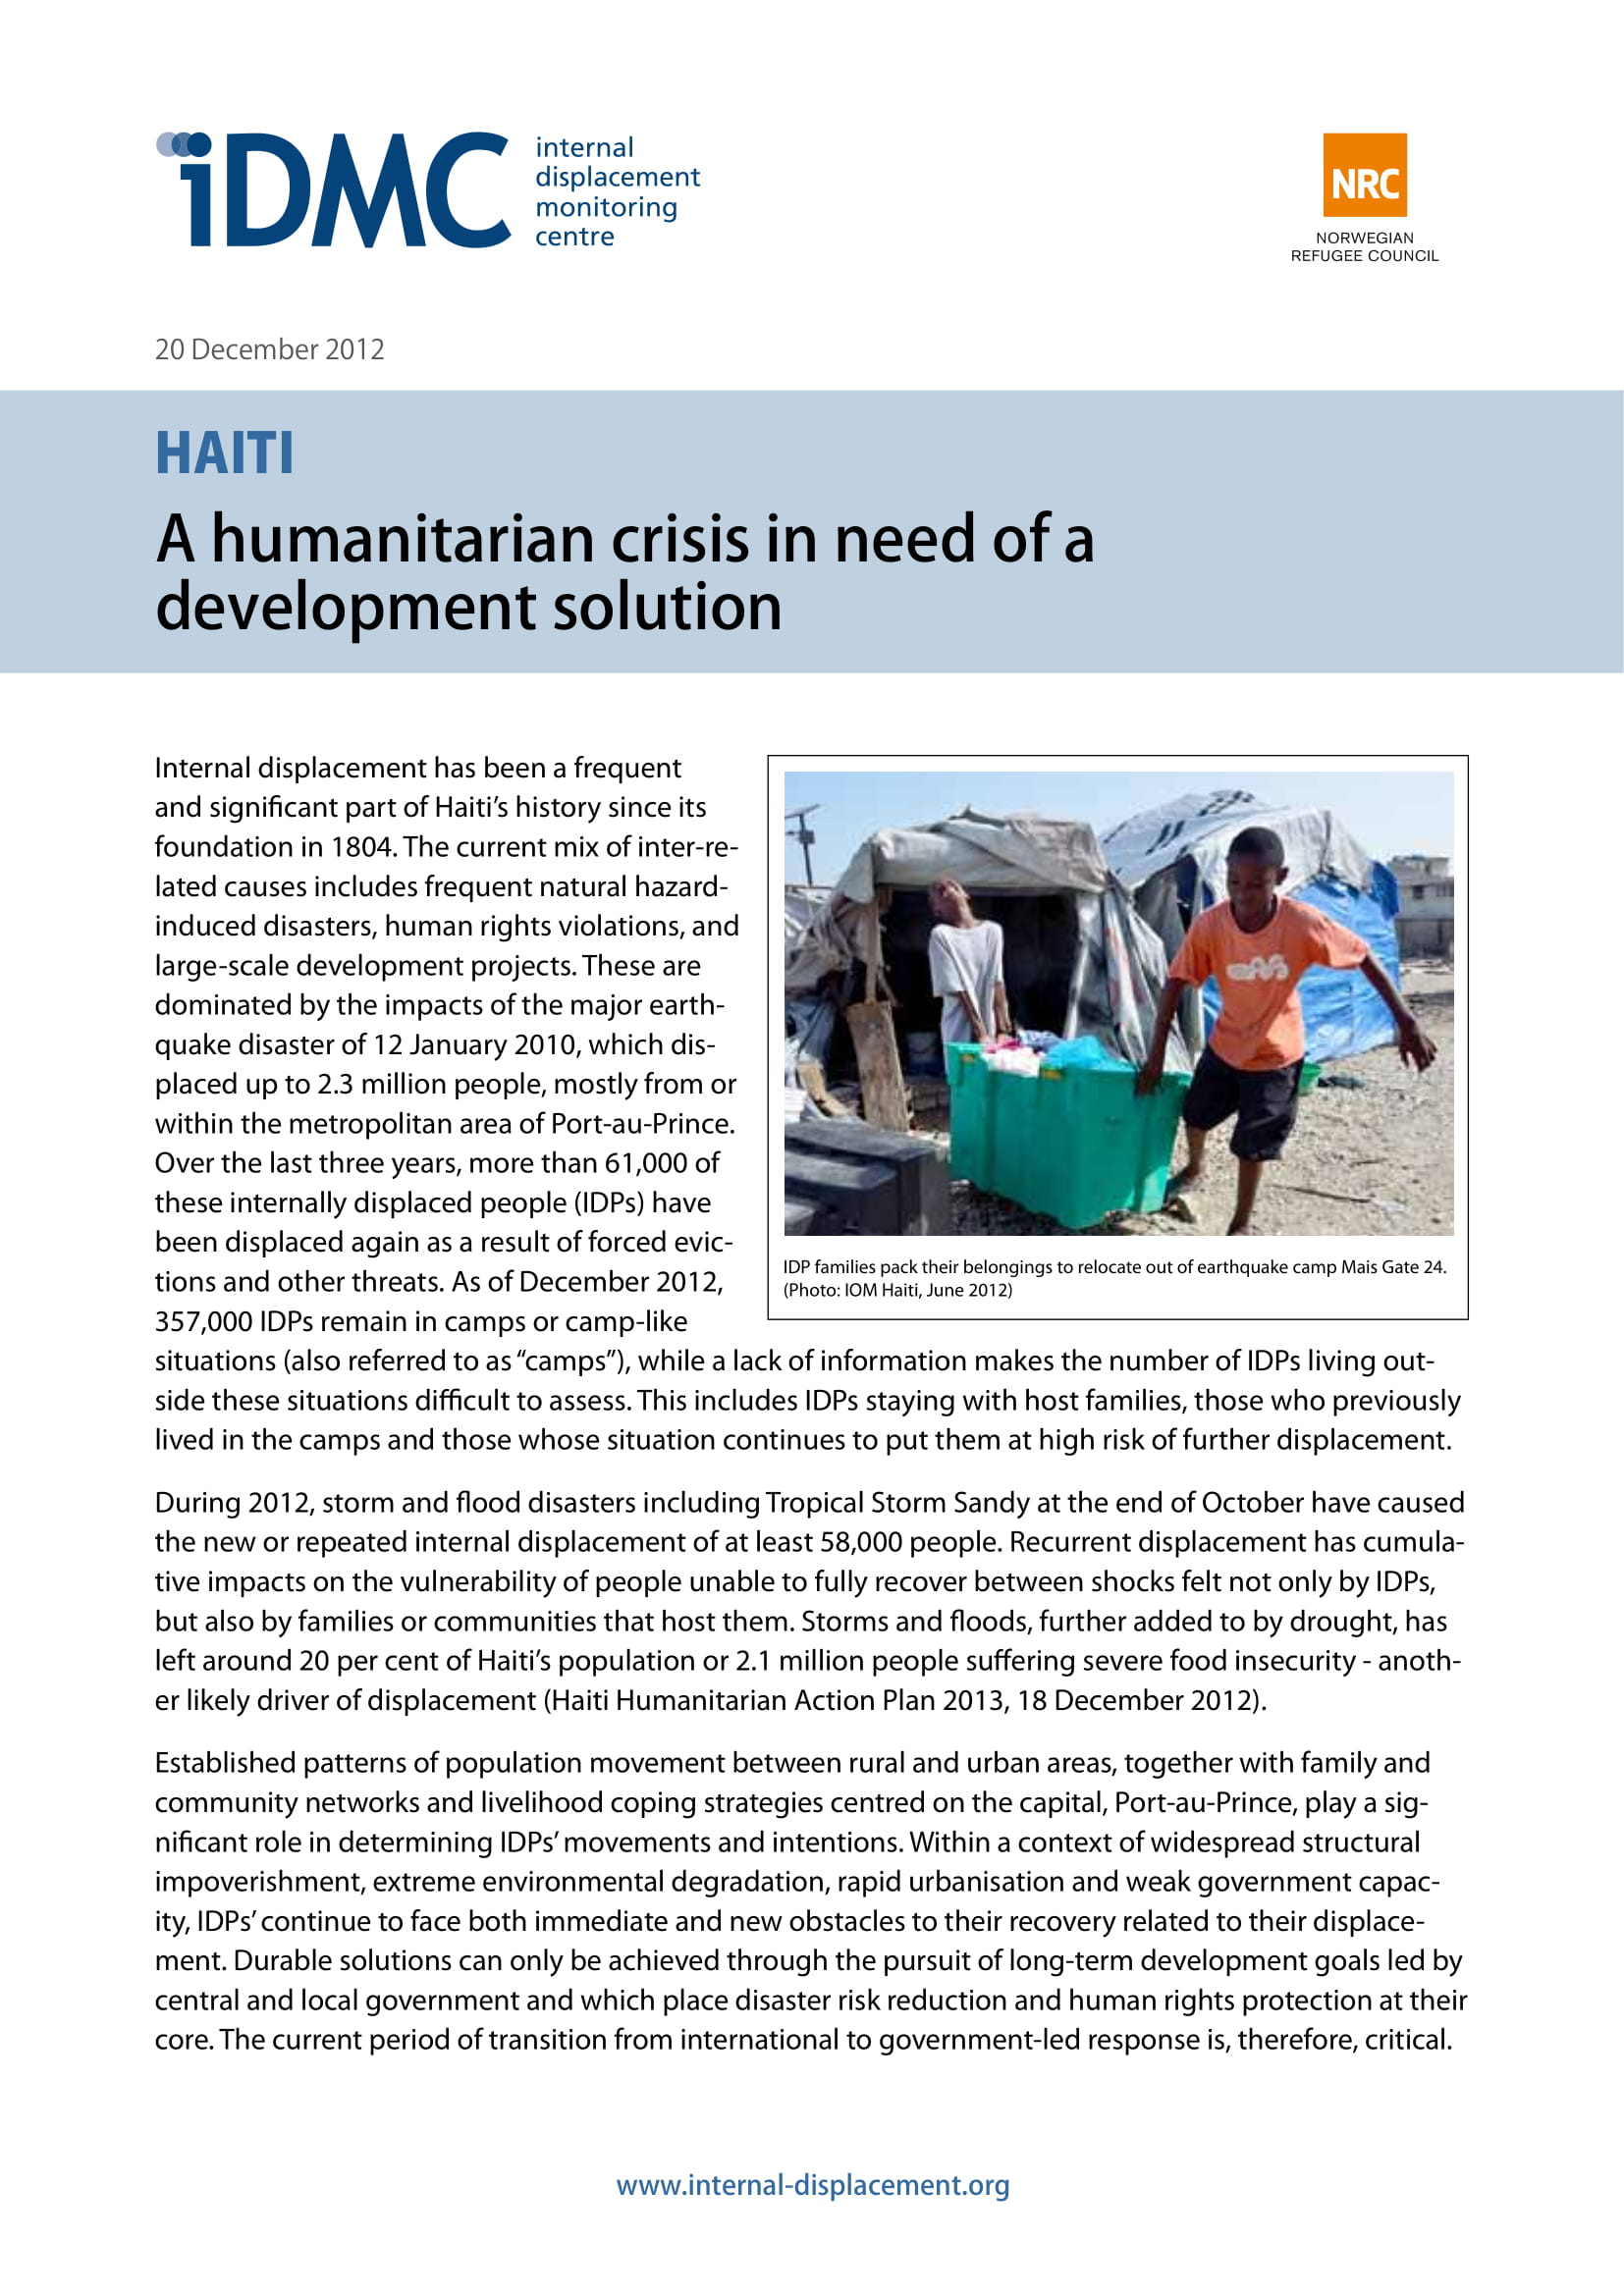 Haiti: A humanitarian crisis in need of a development solution